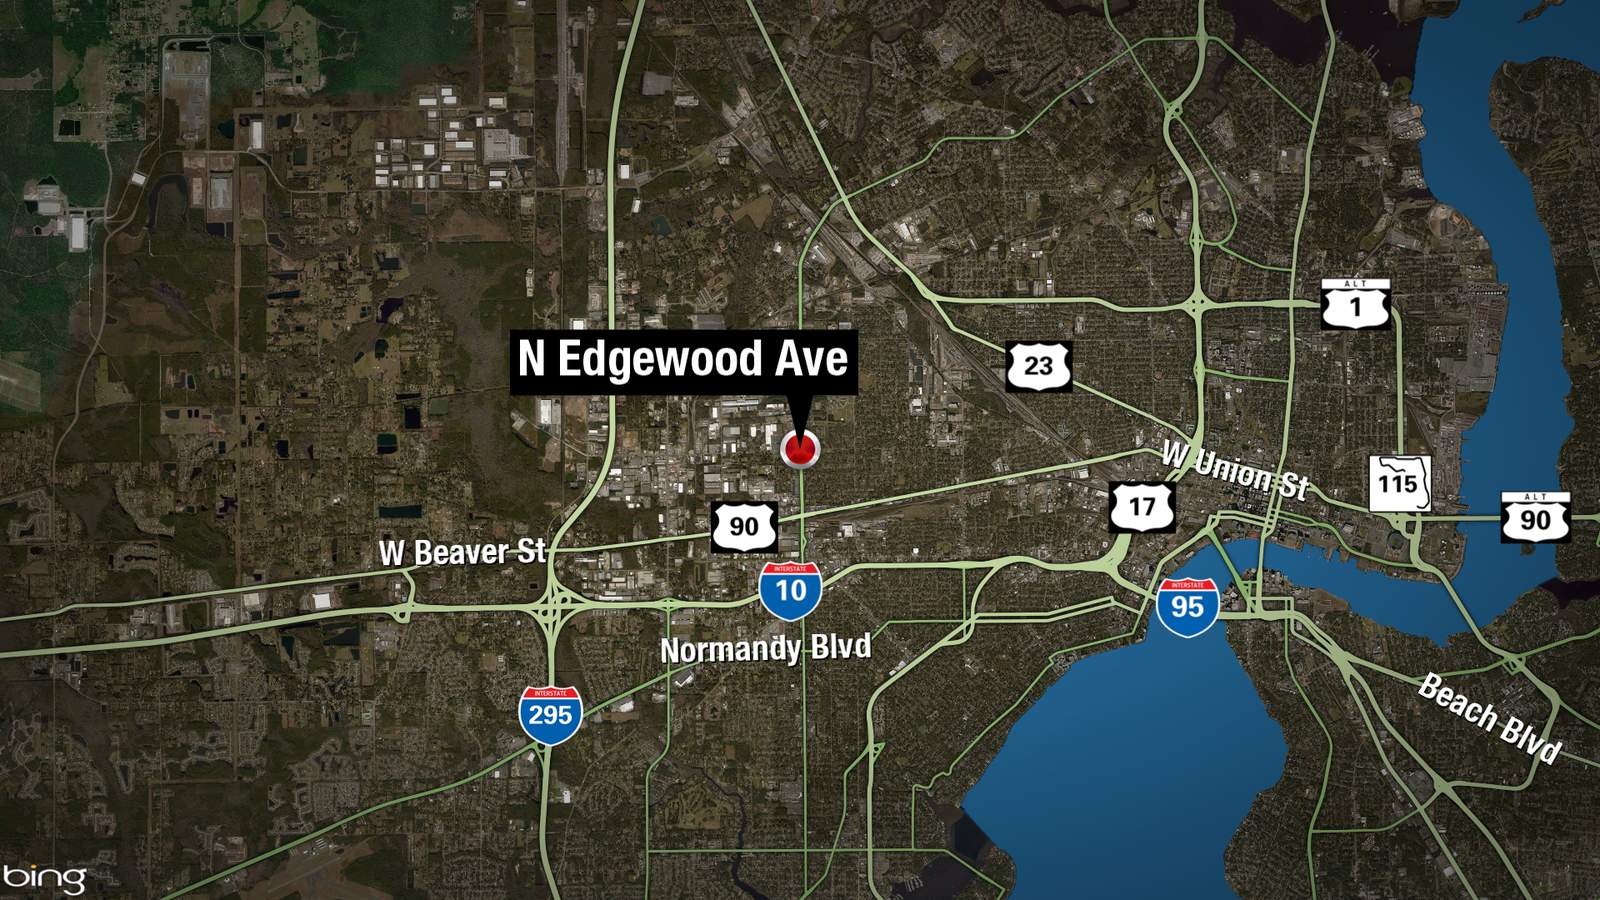 Shooting on N Edgewood Ave, following gas station argument